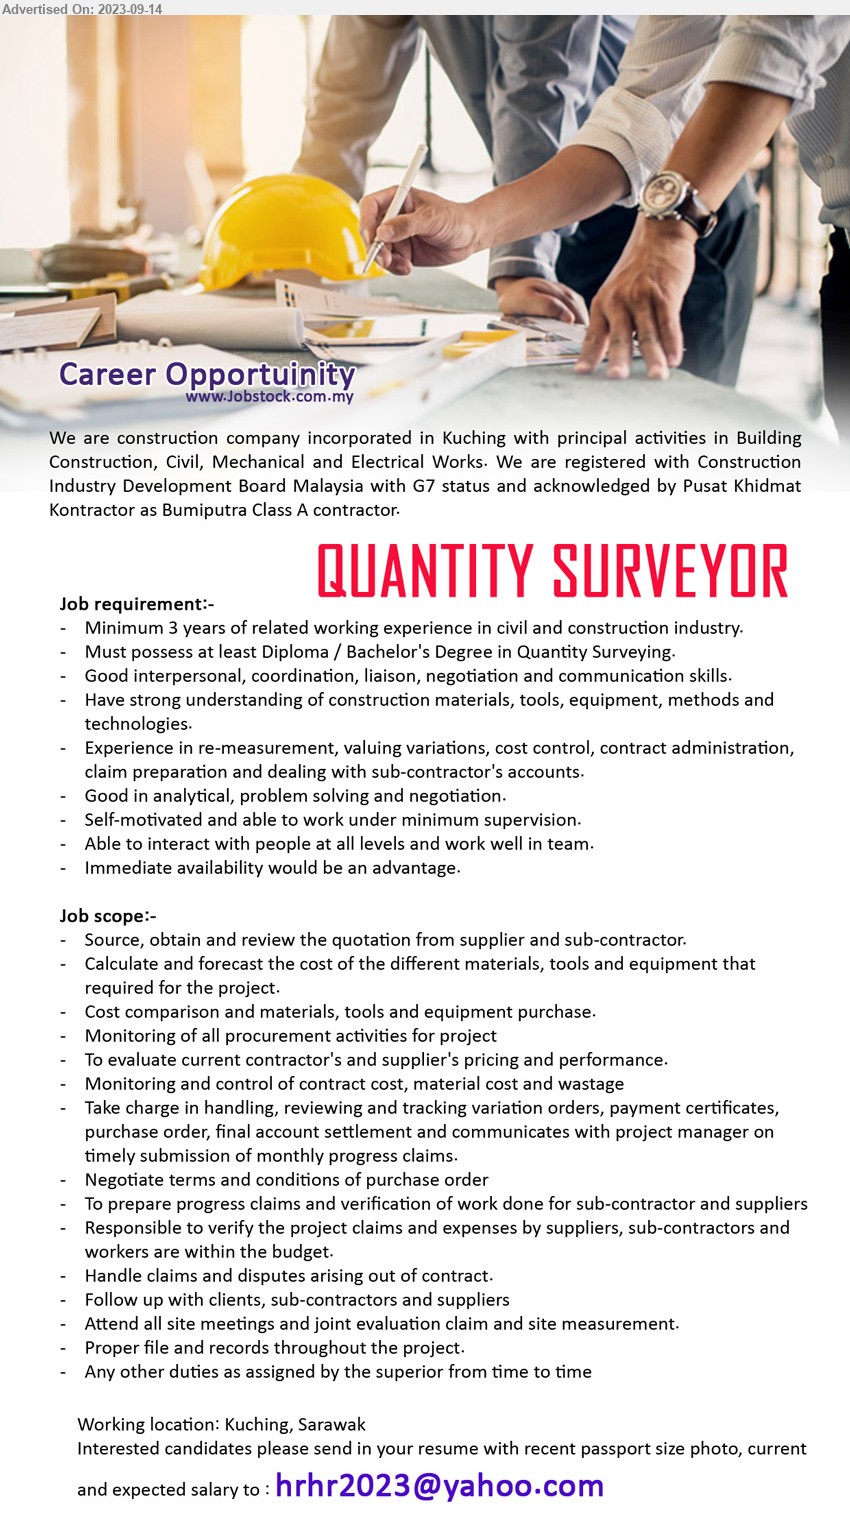 ADVERTISER (Construction Company) - QUANTITY SURVEYOR (Kuching), Diploma / Bachelor's Degree in Quantity Surveying, Minimum 3 years of related working experience in civil and construction industry....
Email resume to ...
